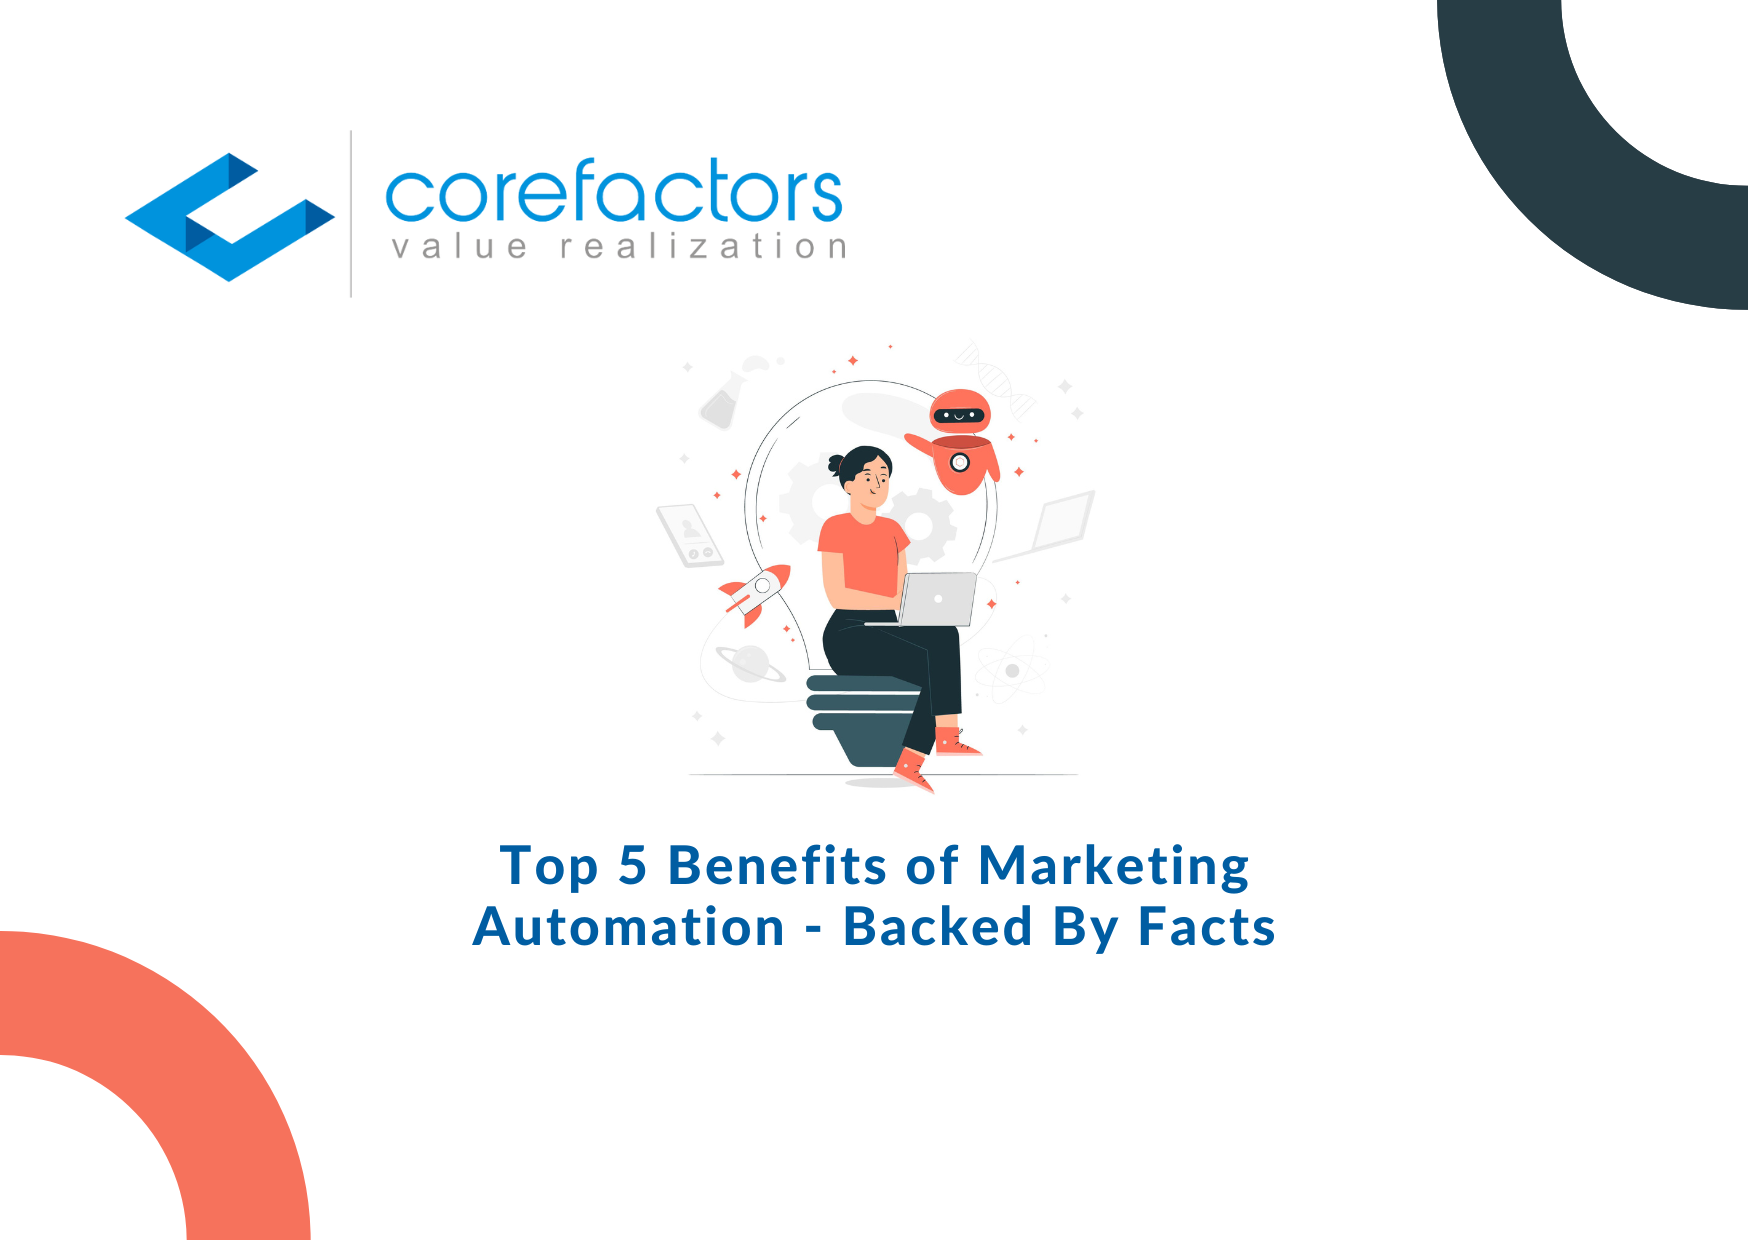 Top 5 Benefits of Marketing Automation